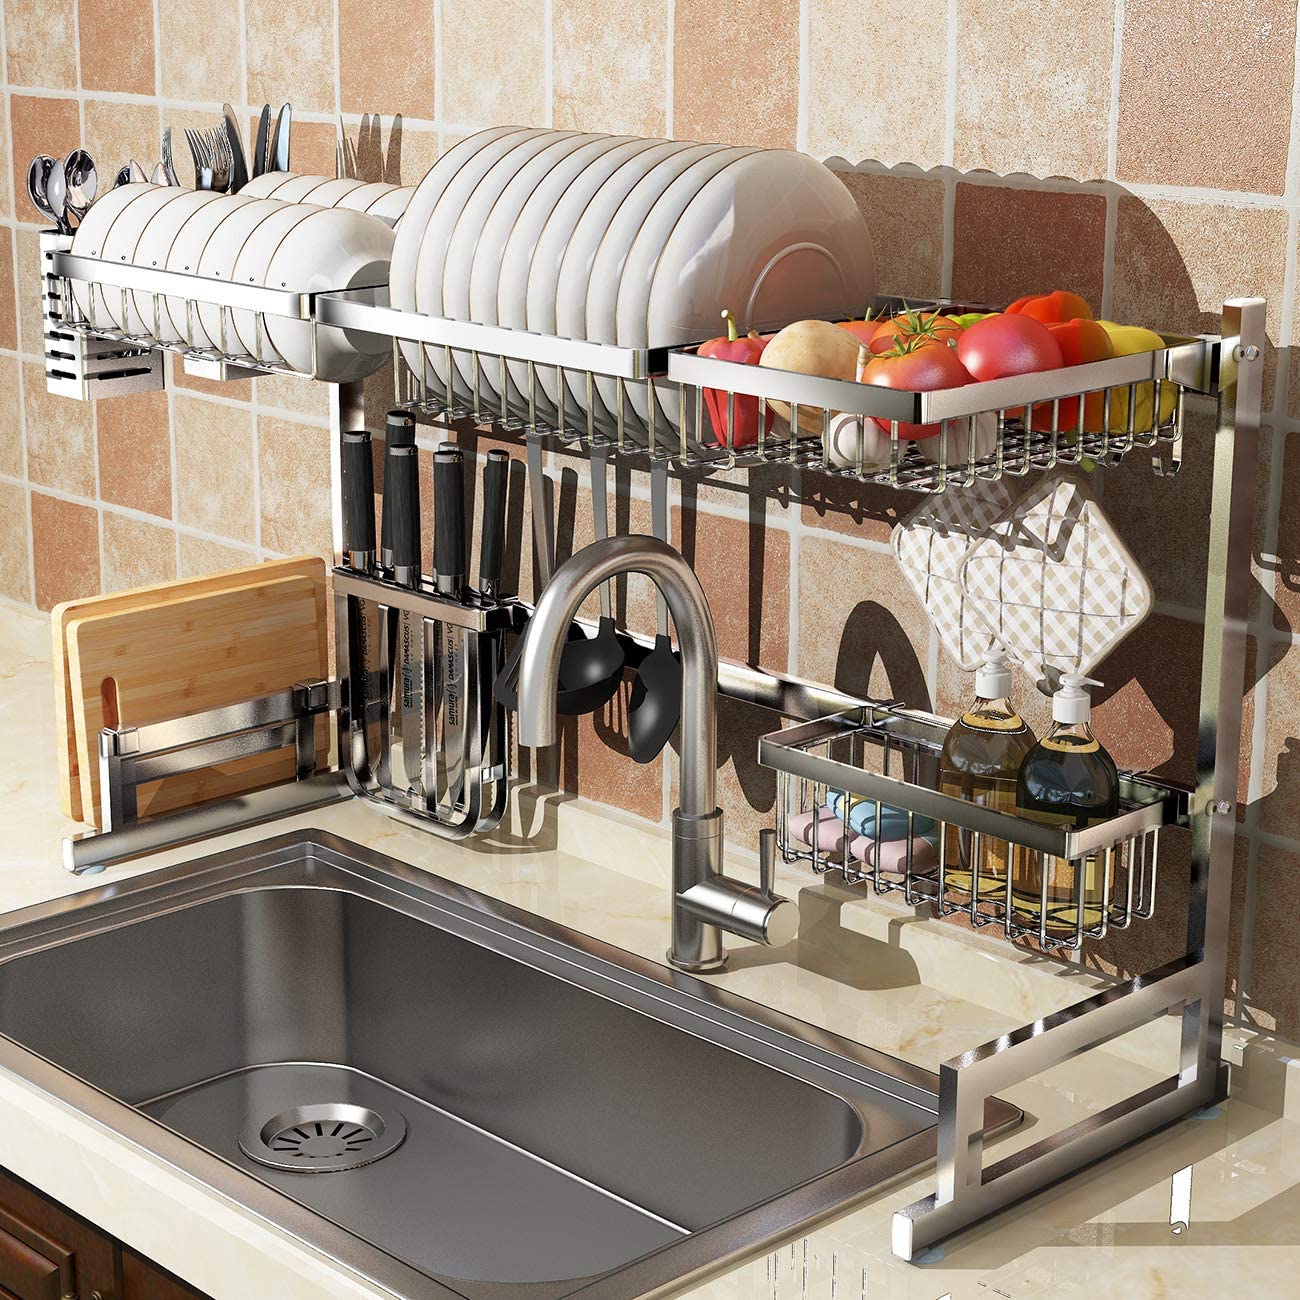 Over Sink Dish Drying Rack 2-Tier Stainless Steel Kitchen Shelf Cutlery Over The Sink Stainless Steel Dish Rack